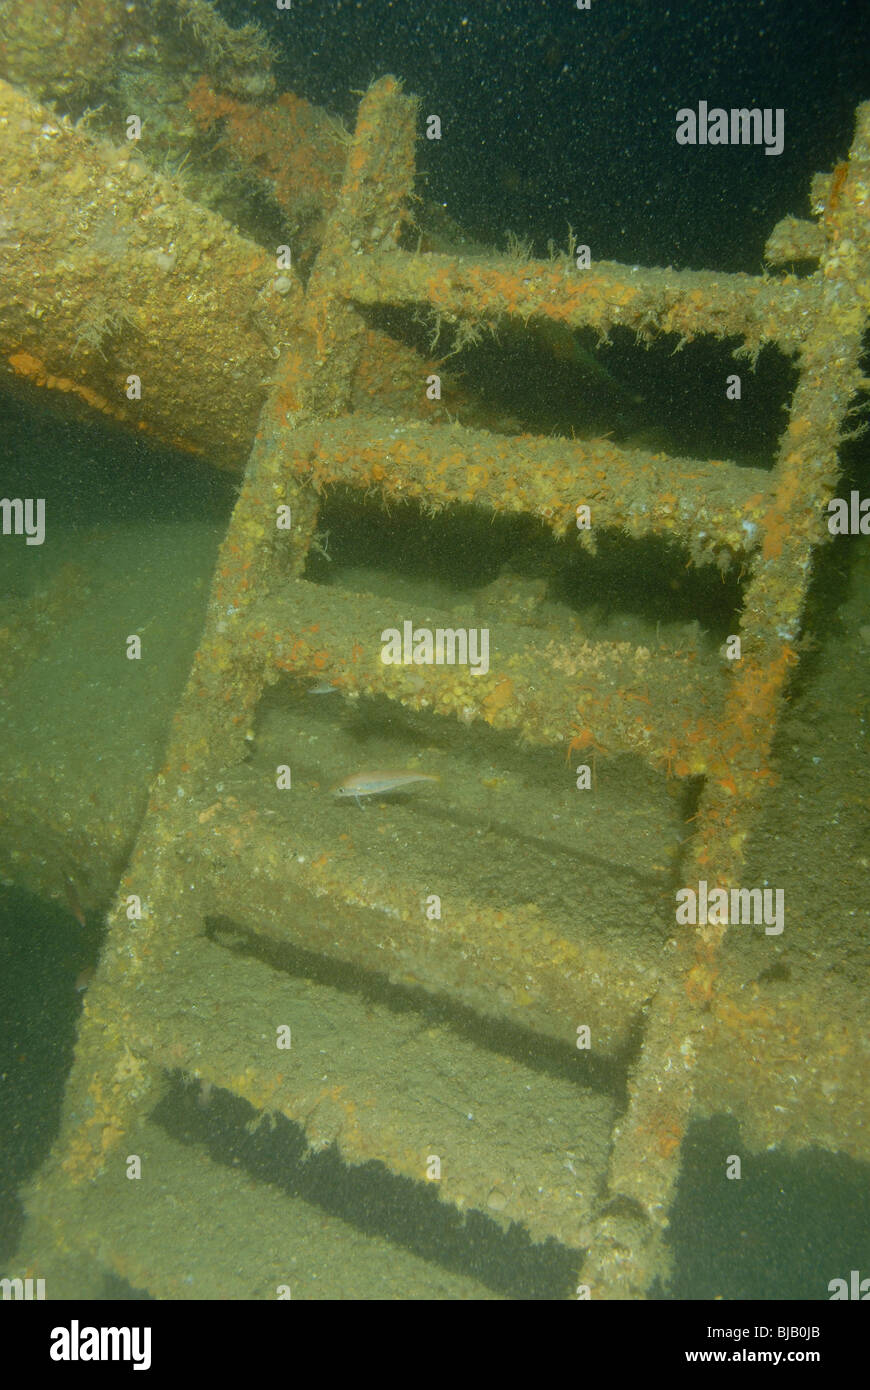 Remainings of the wreck of US Susan B Anthony in Normandy Stock Photo